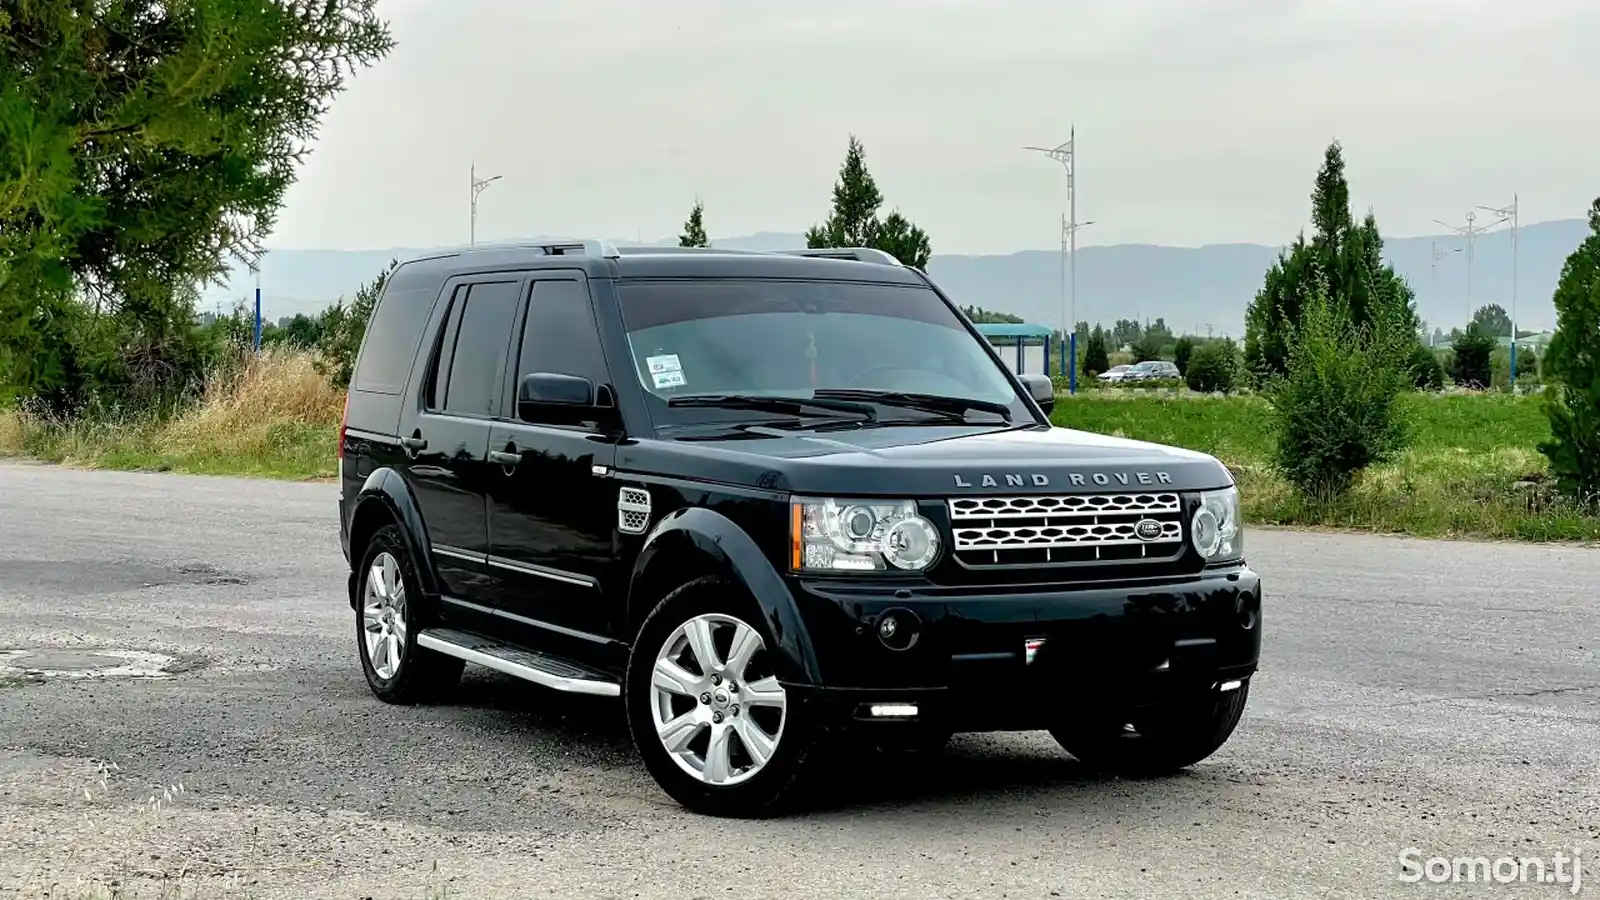 Land Rover Discovery, 2013-4